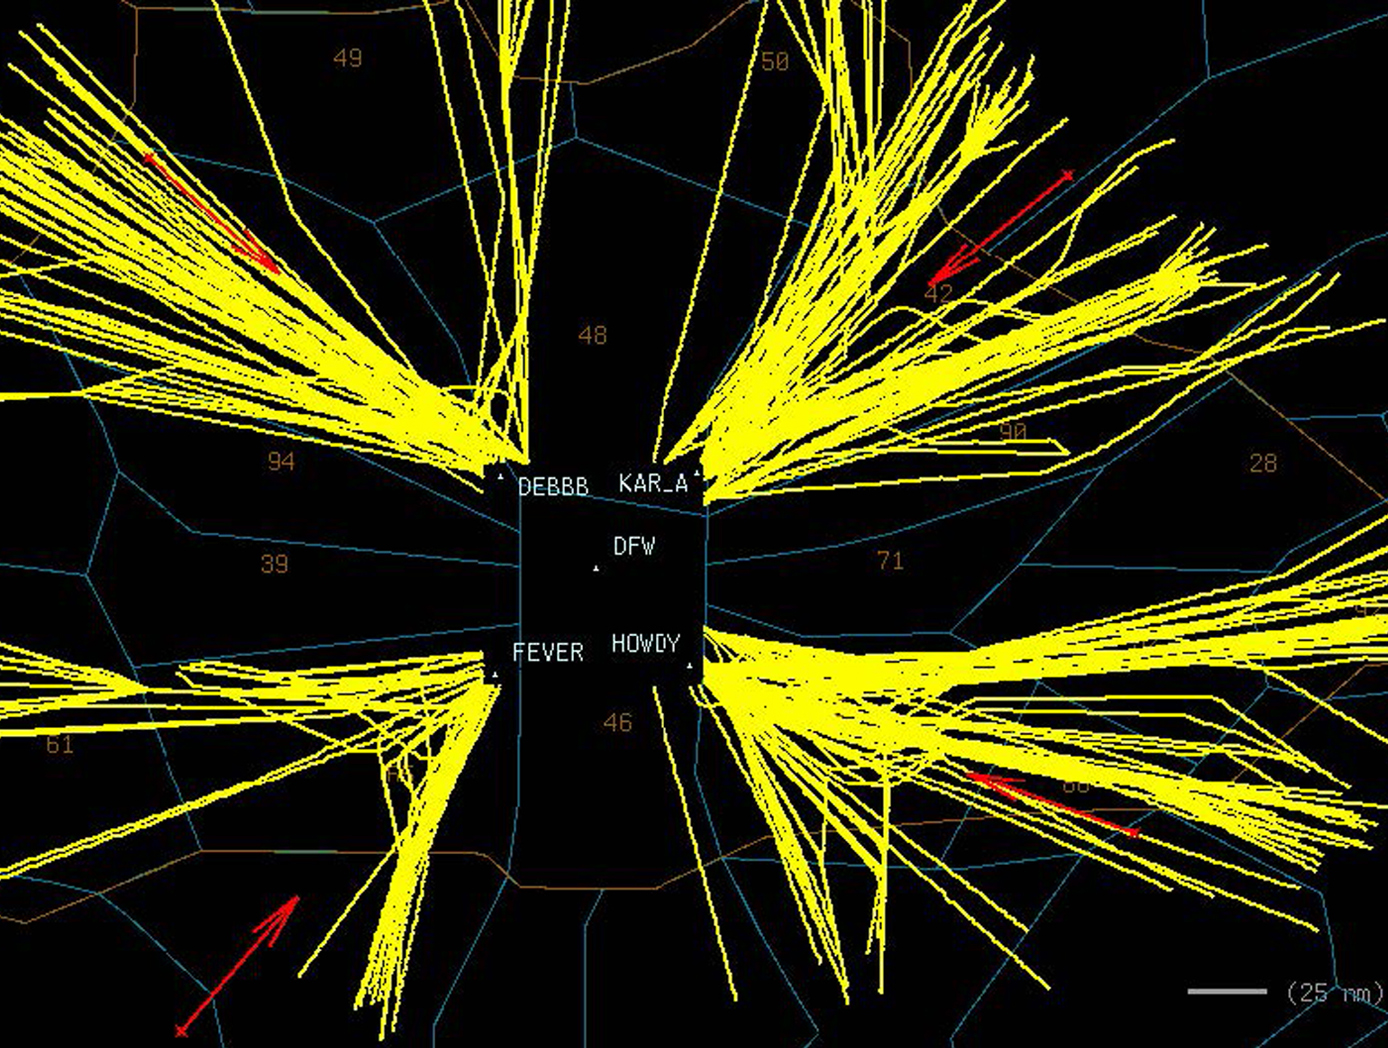 Tracks of small jet arrivals into Dallas Fort Worth, Texas